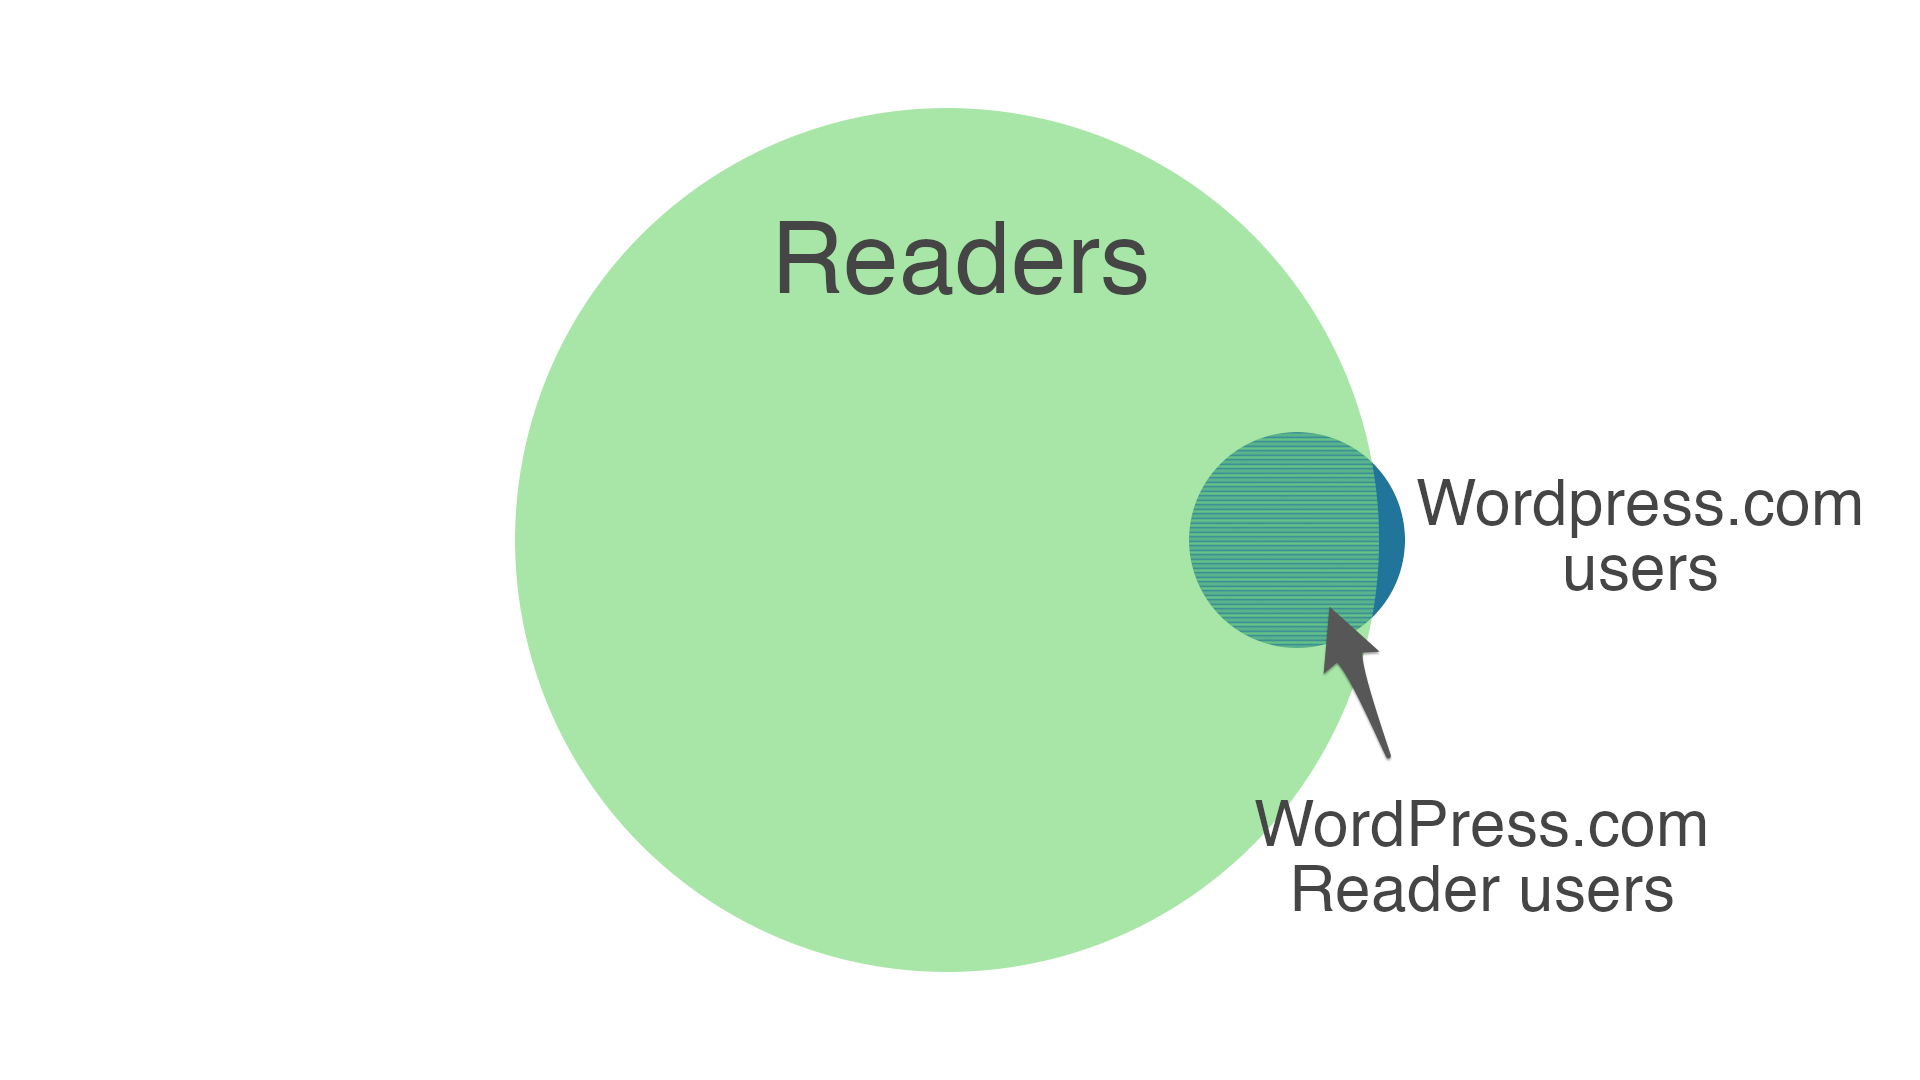 All the un-patterned green space represents the readers who don’t have access to WordPress.com Reader